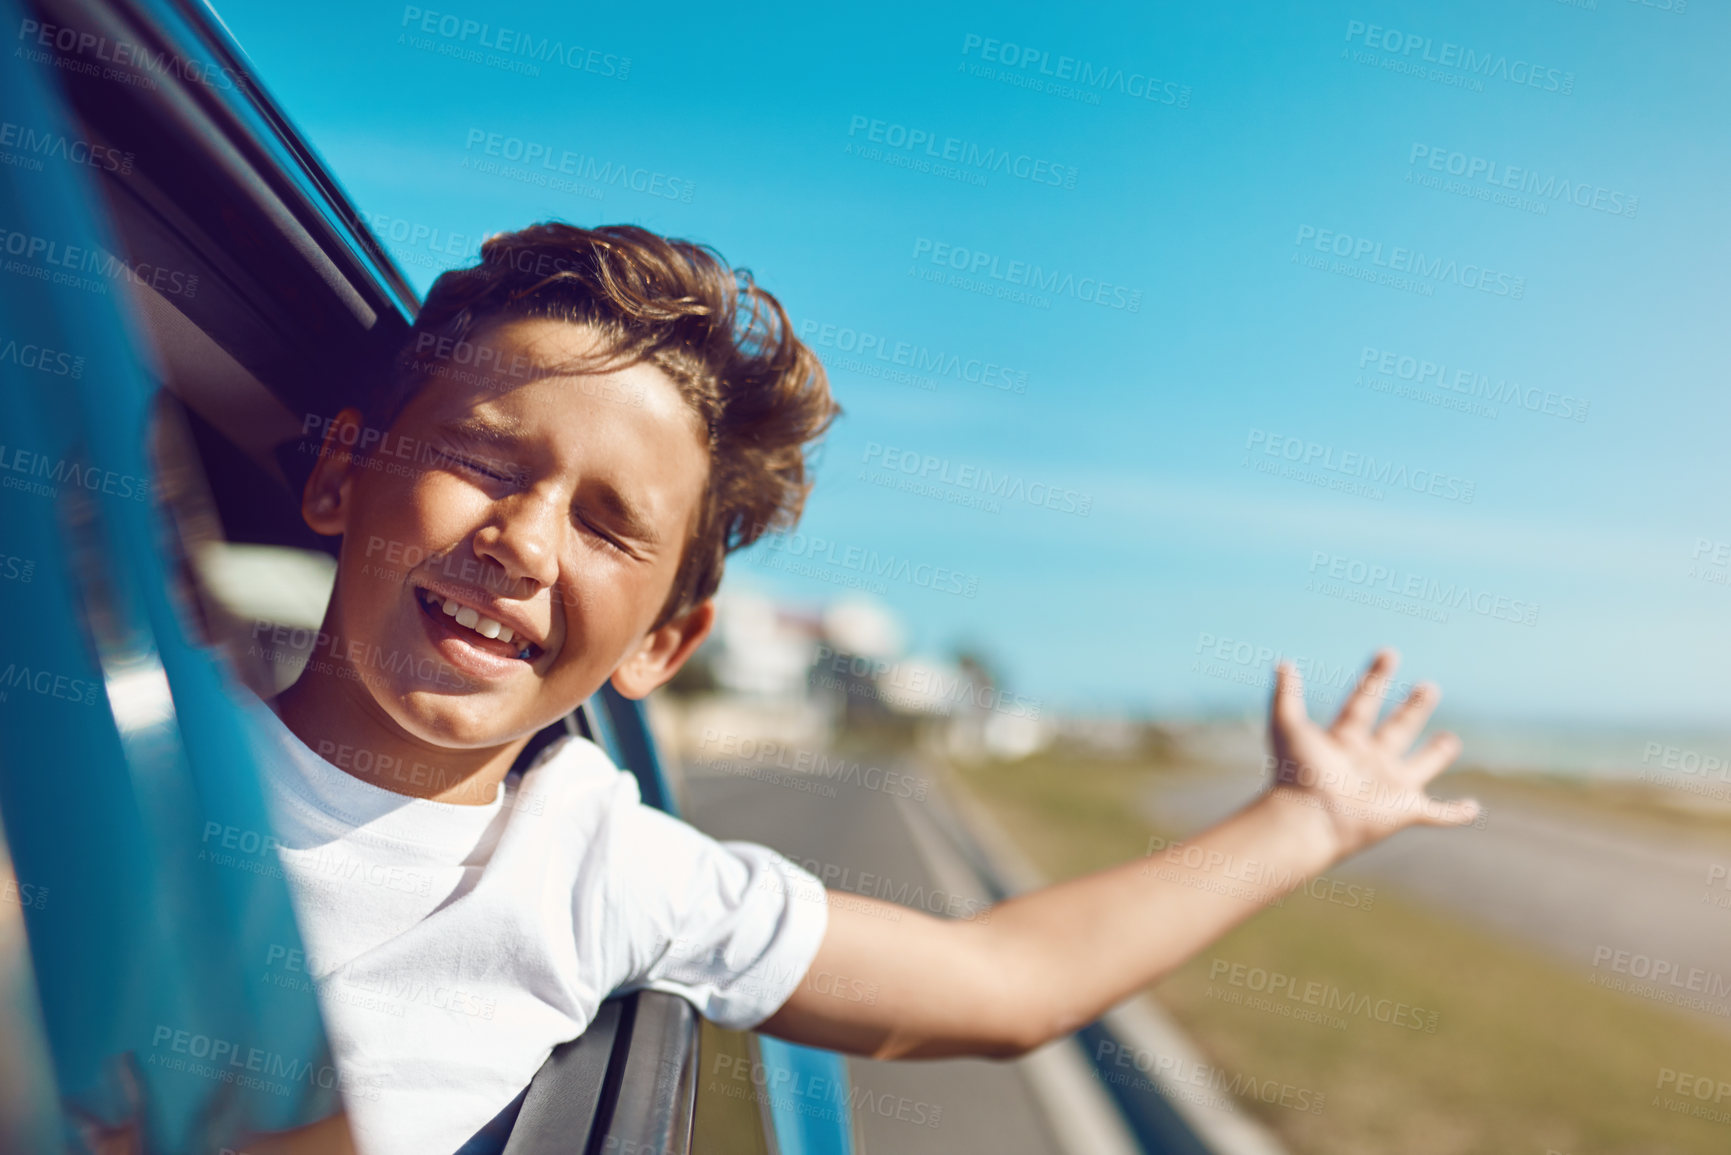 Buy stock photo Shot of a happy young boy leaning out of the car window on a trip to the beach